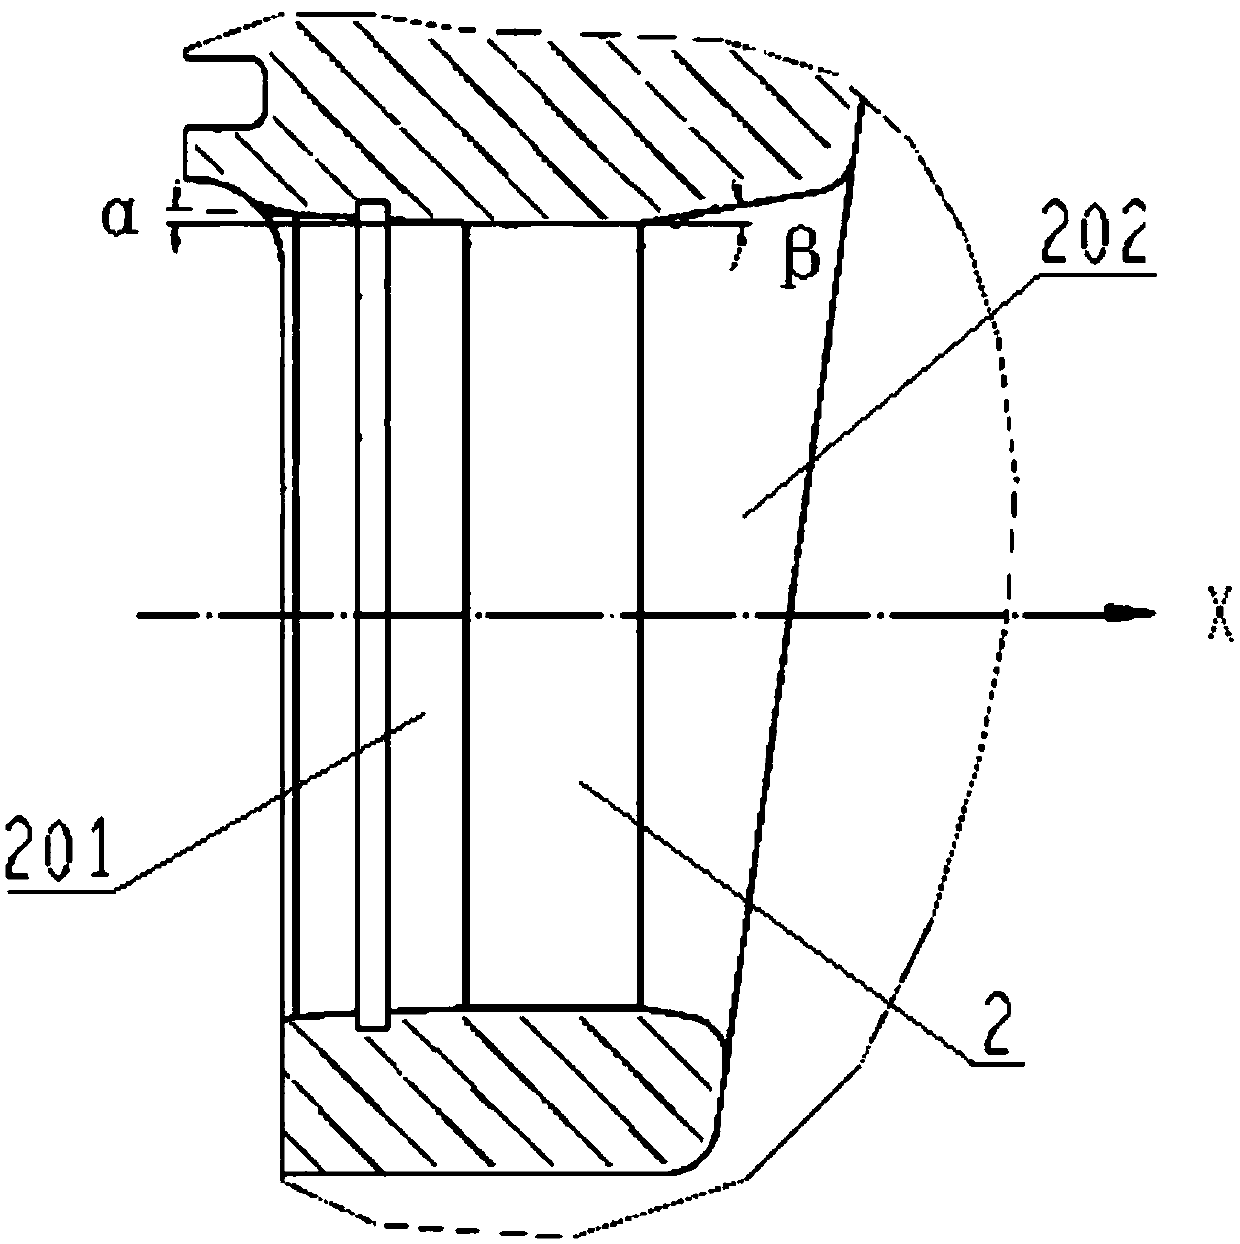 Piston-piston pin-connecting rod combined unit matched structure